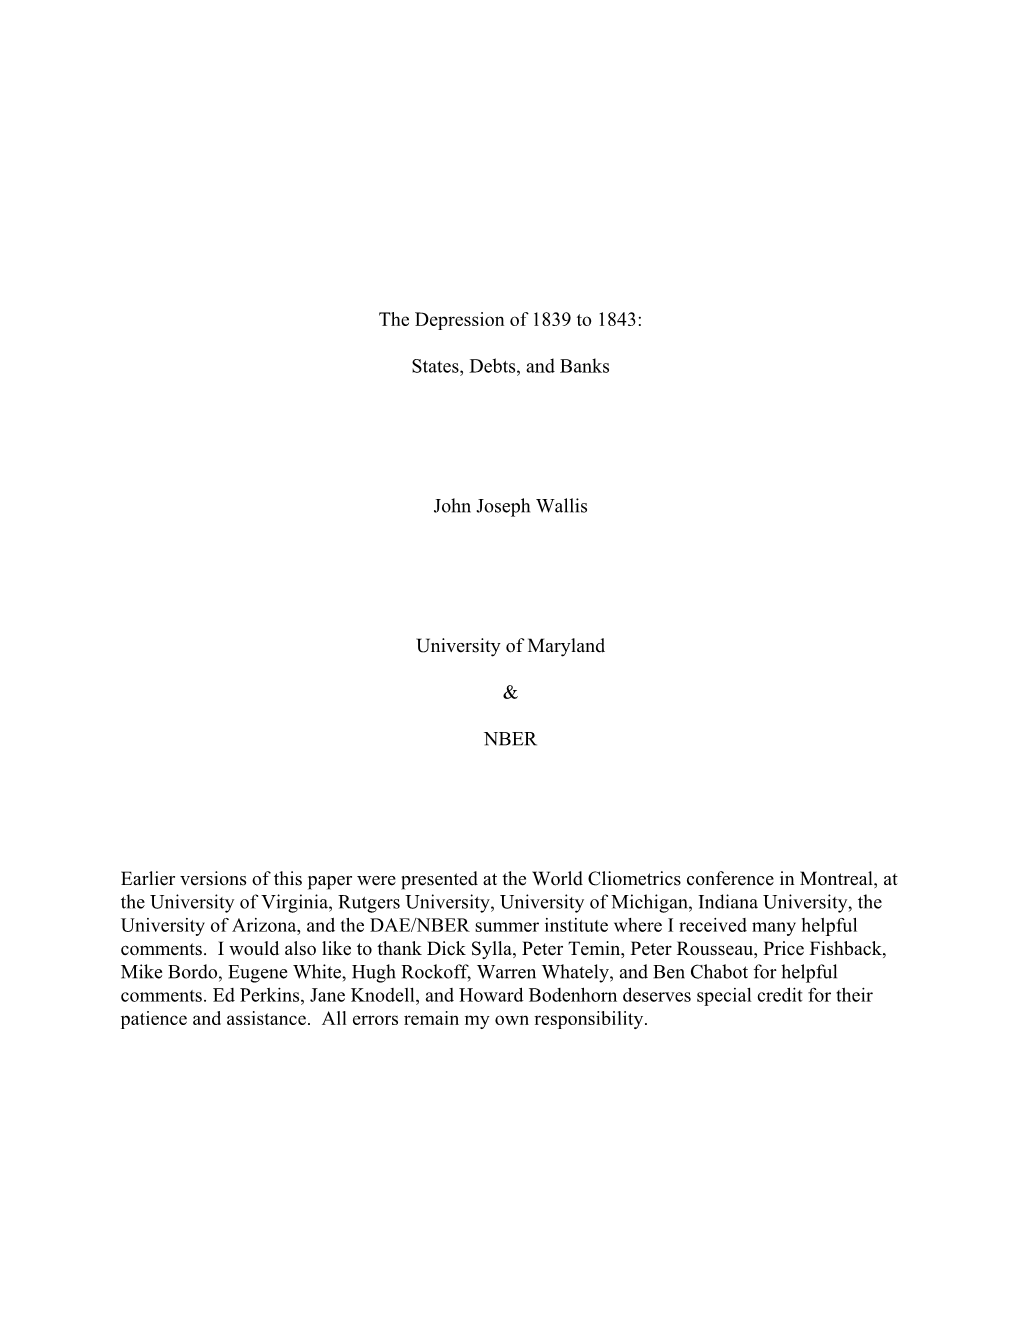 The Depression of 1839 to 1843: States, Debts, and Banks John